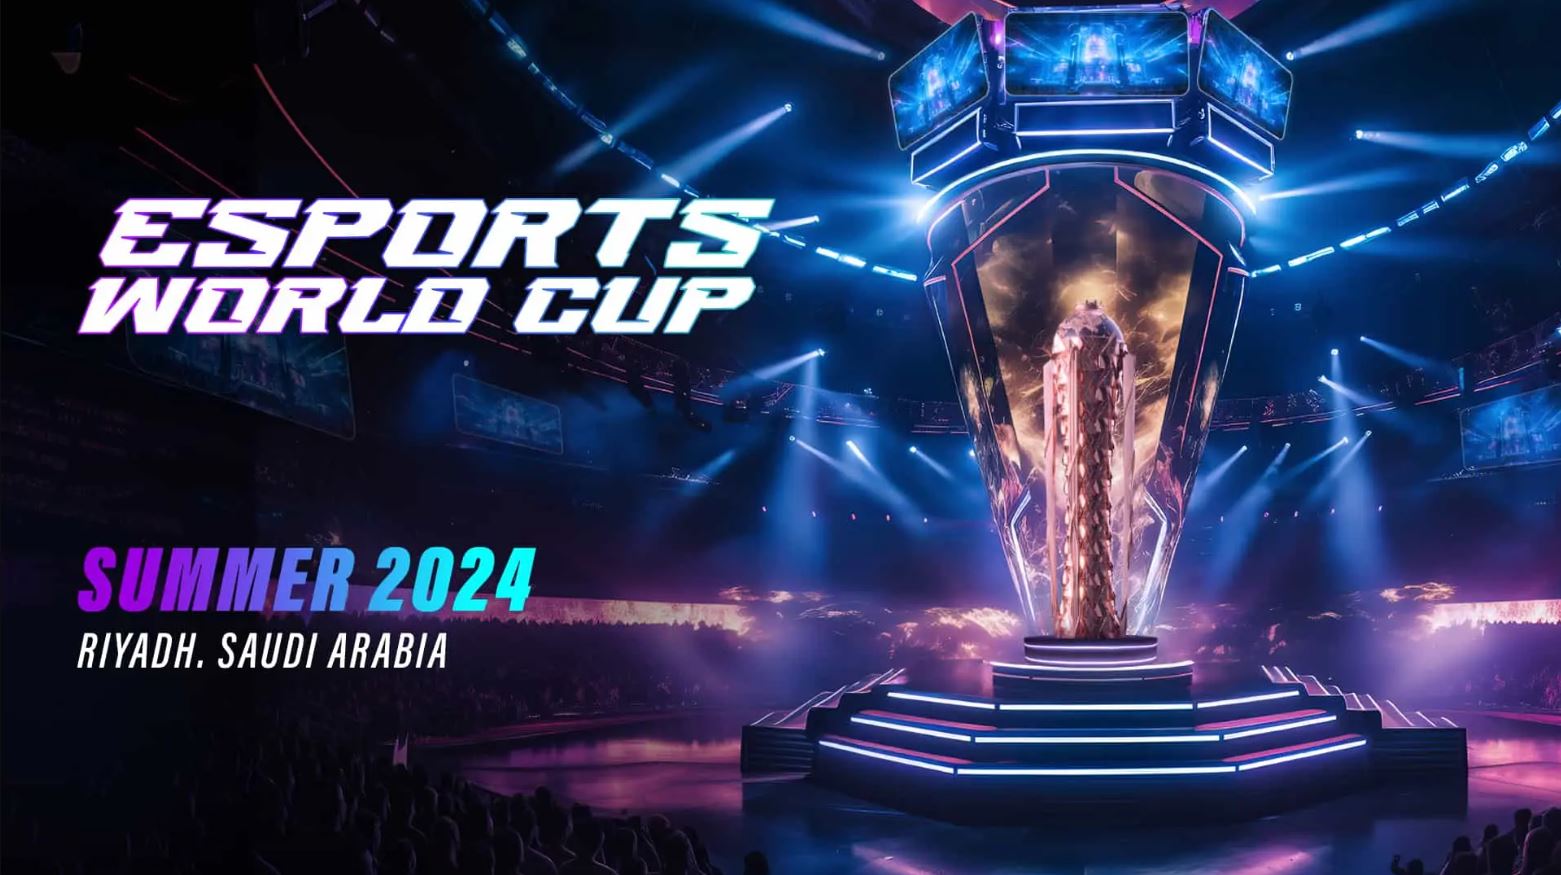 Everything You Need To Know About the Esports World Cup – Schedule, Venue, and More cover